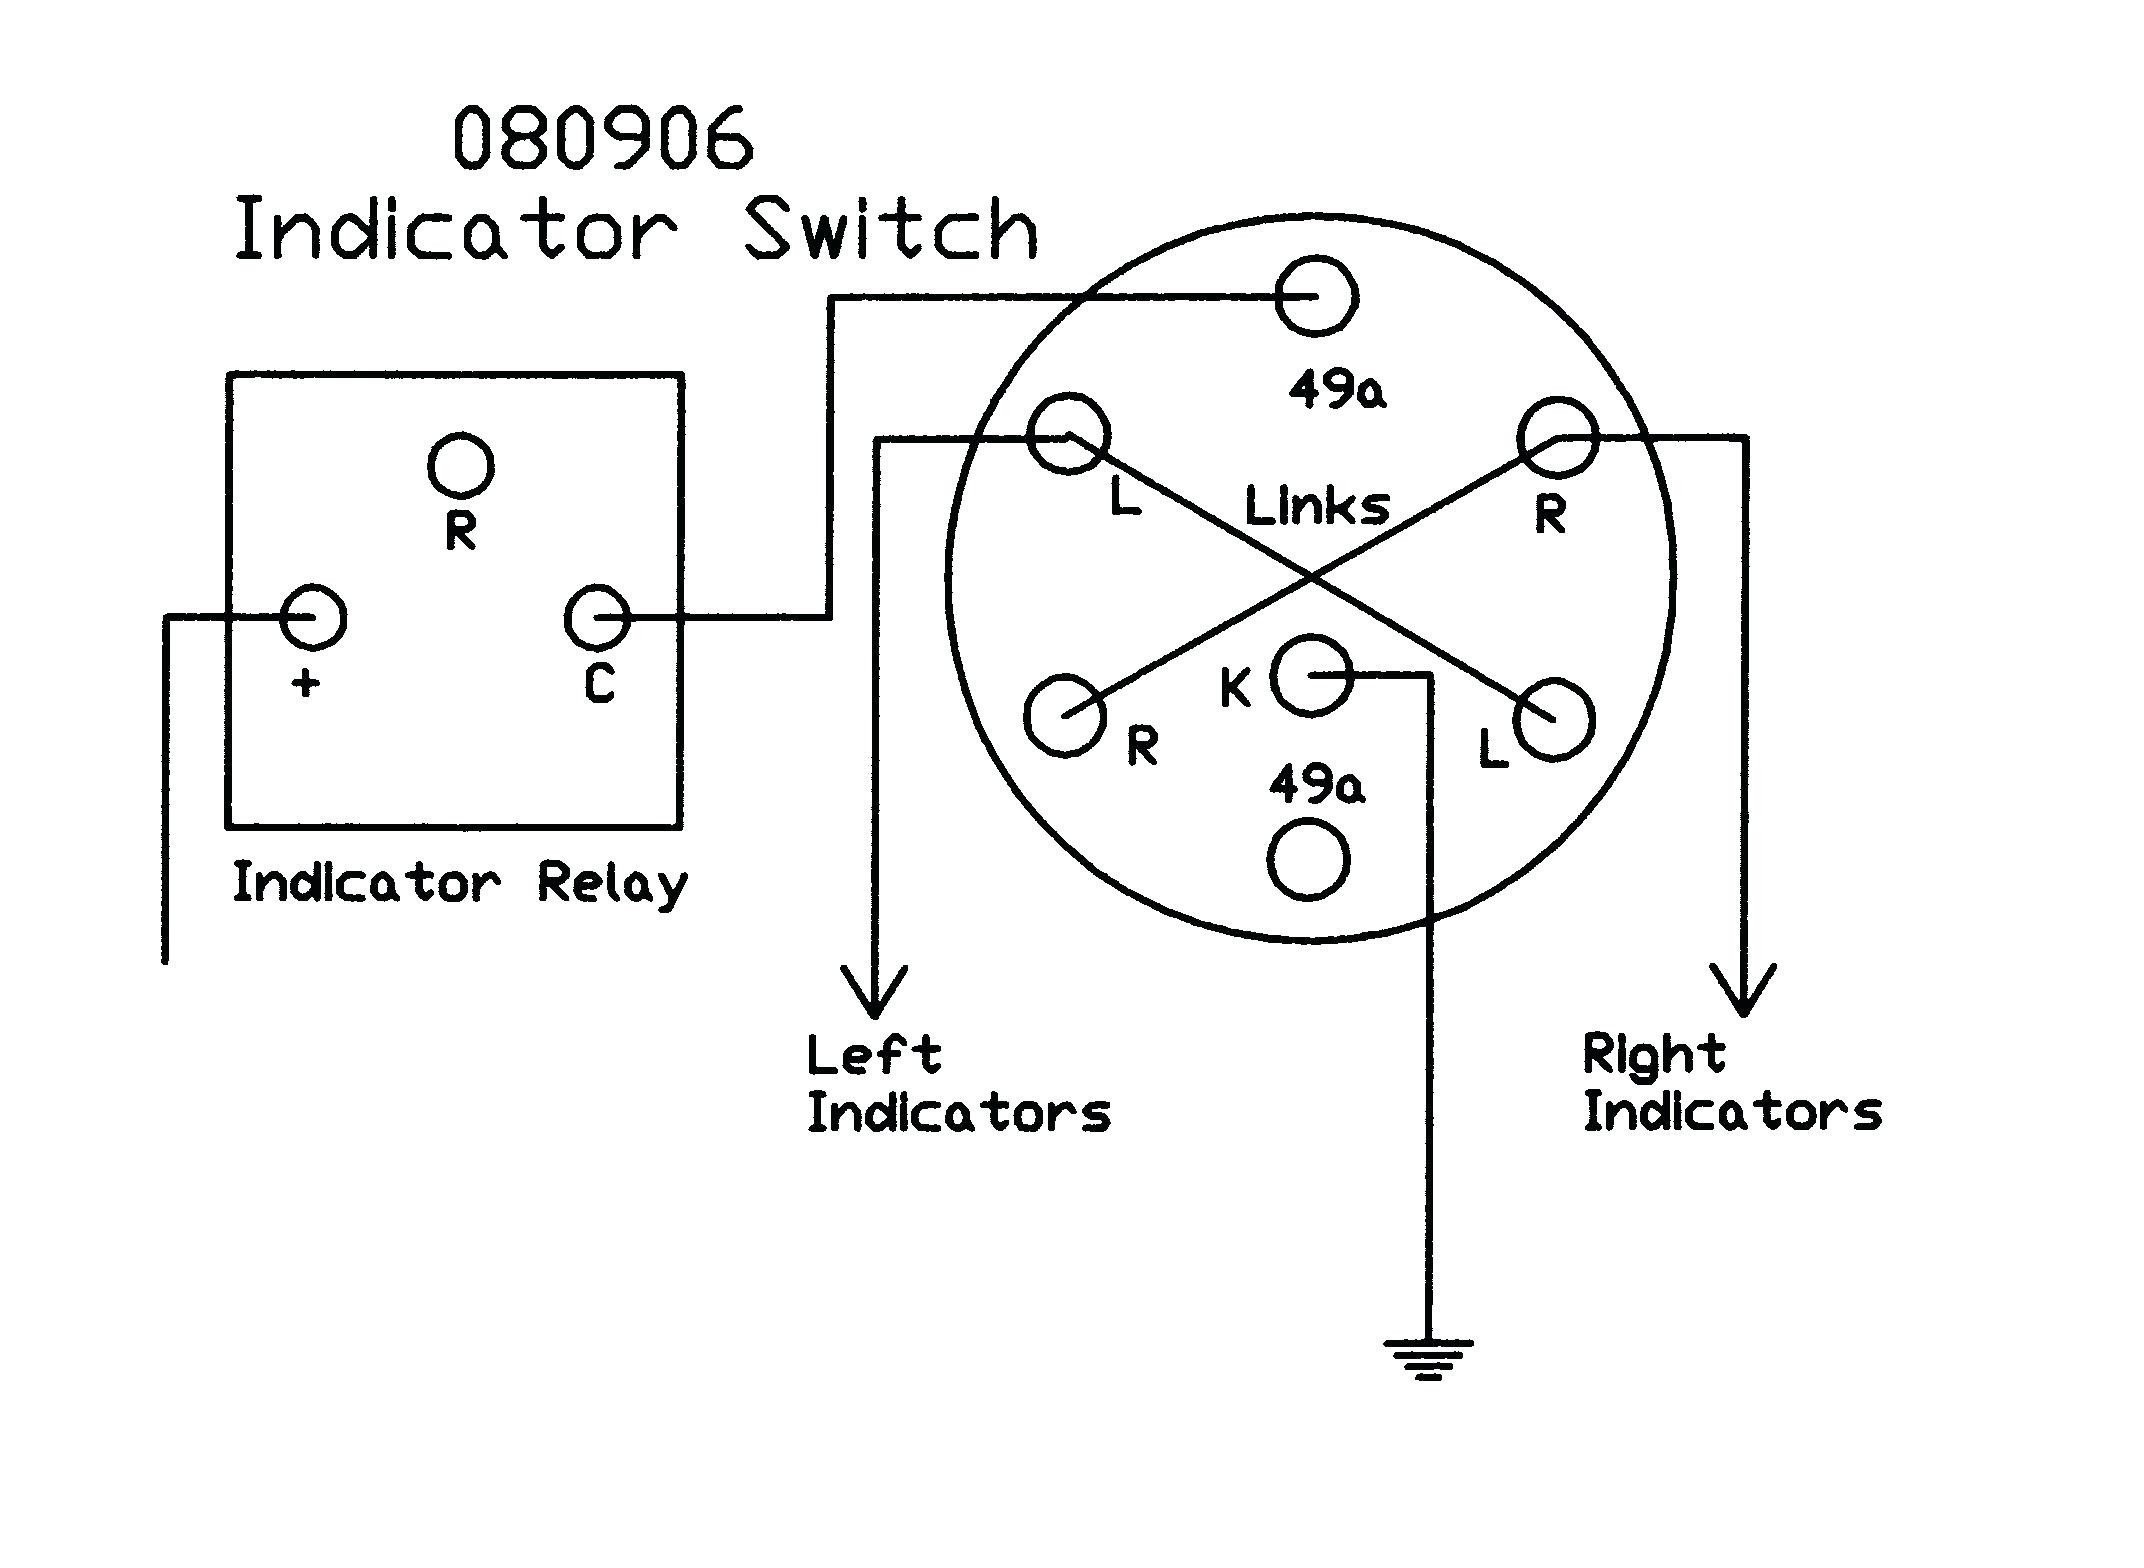 3 Position Selector Switch Wiring Diagram Luxury Wiring Diagram for A 6 Position Rotary Switch Archives